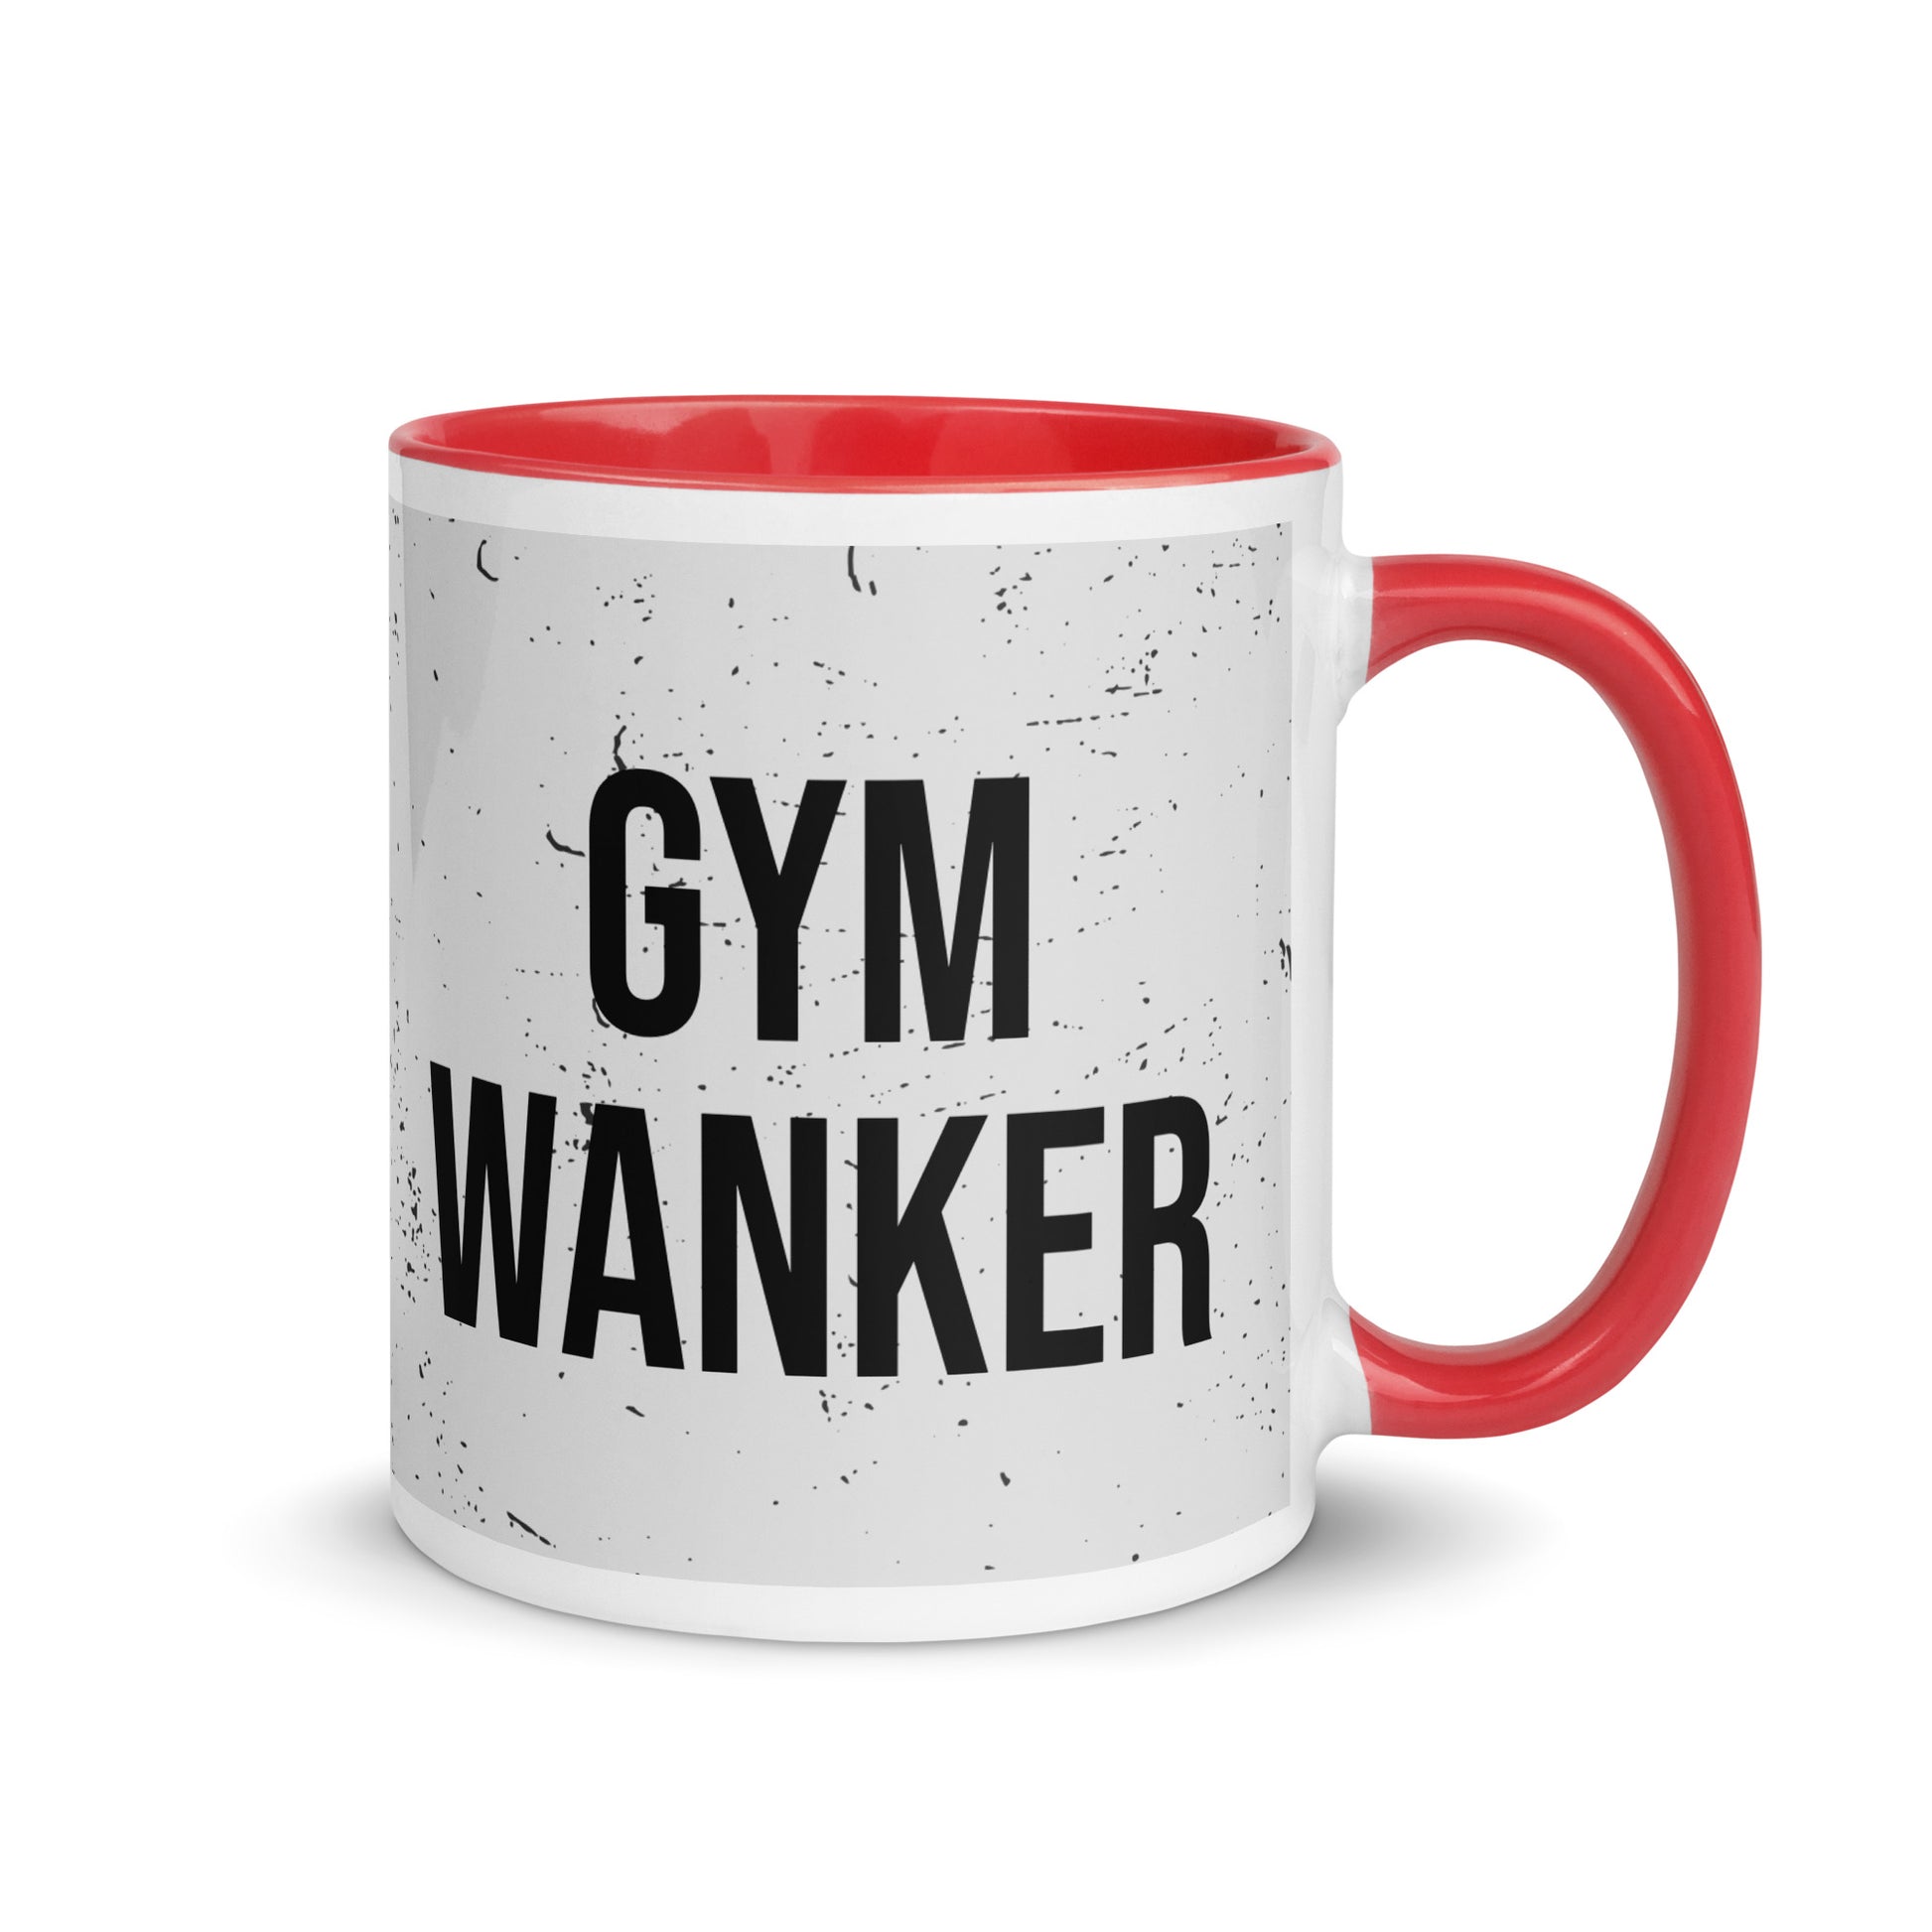 Red handled mug with gym wanker written on it, across a grey splatter background. A gift for someone who loves the gym.